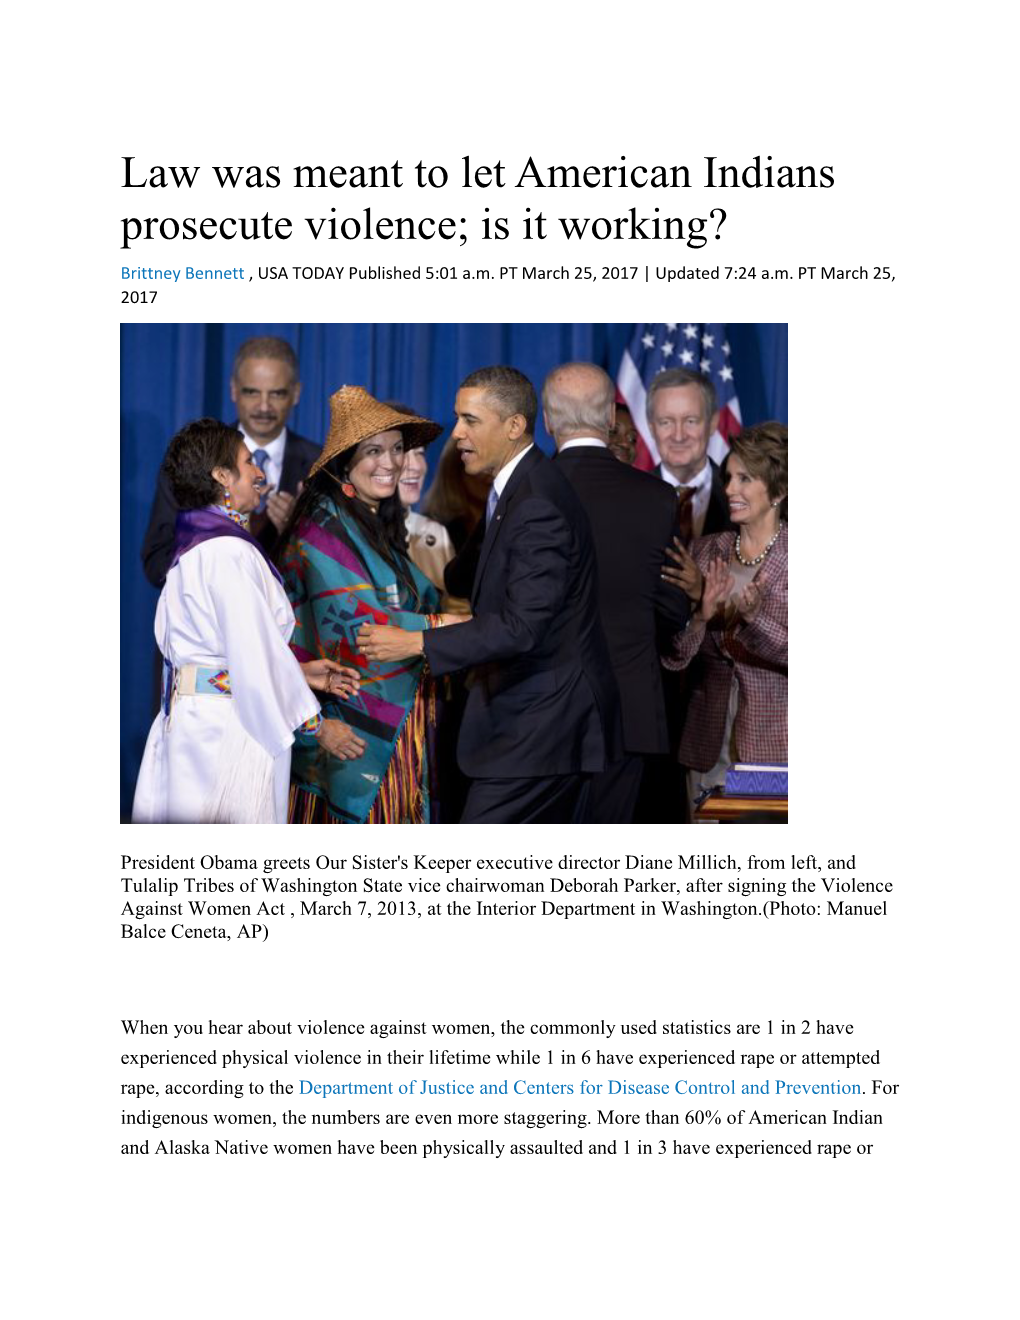 Law Was Meant to Let American Indians Prosecute Violence; Is It Working? Brittney Bennett , USA TODAY Published 5:01 A.M